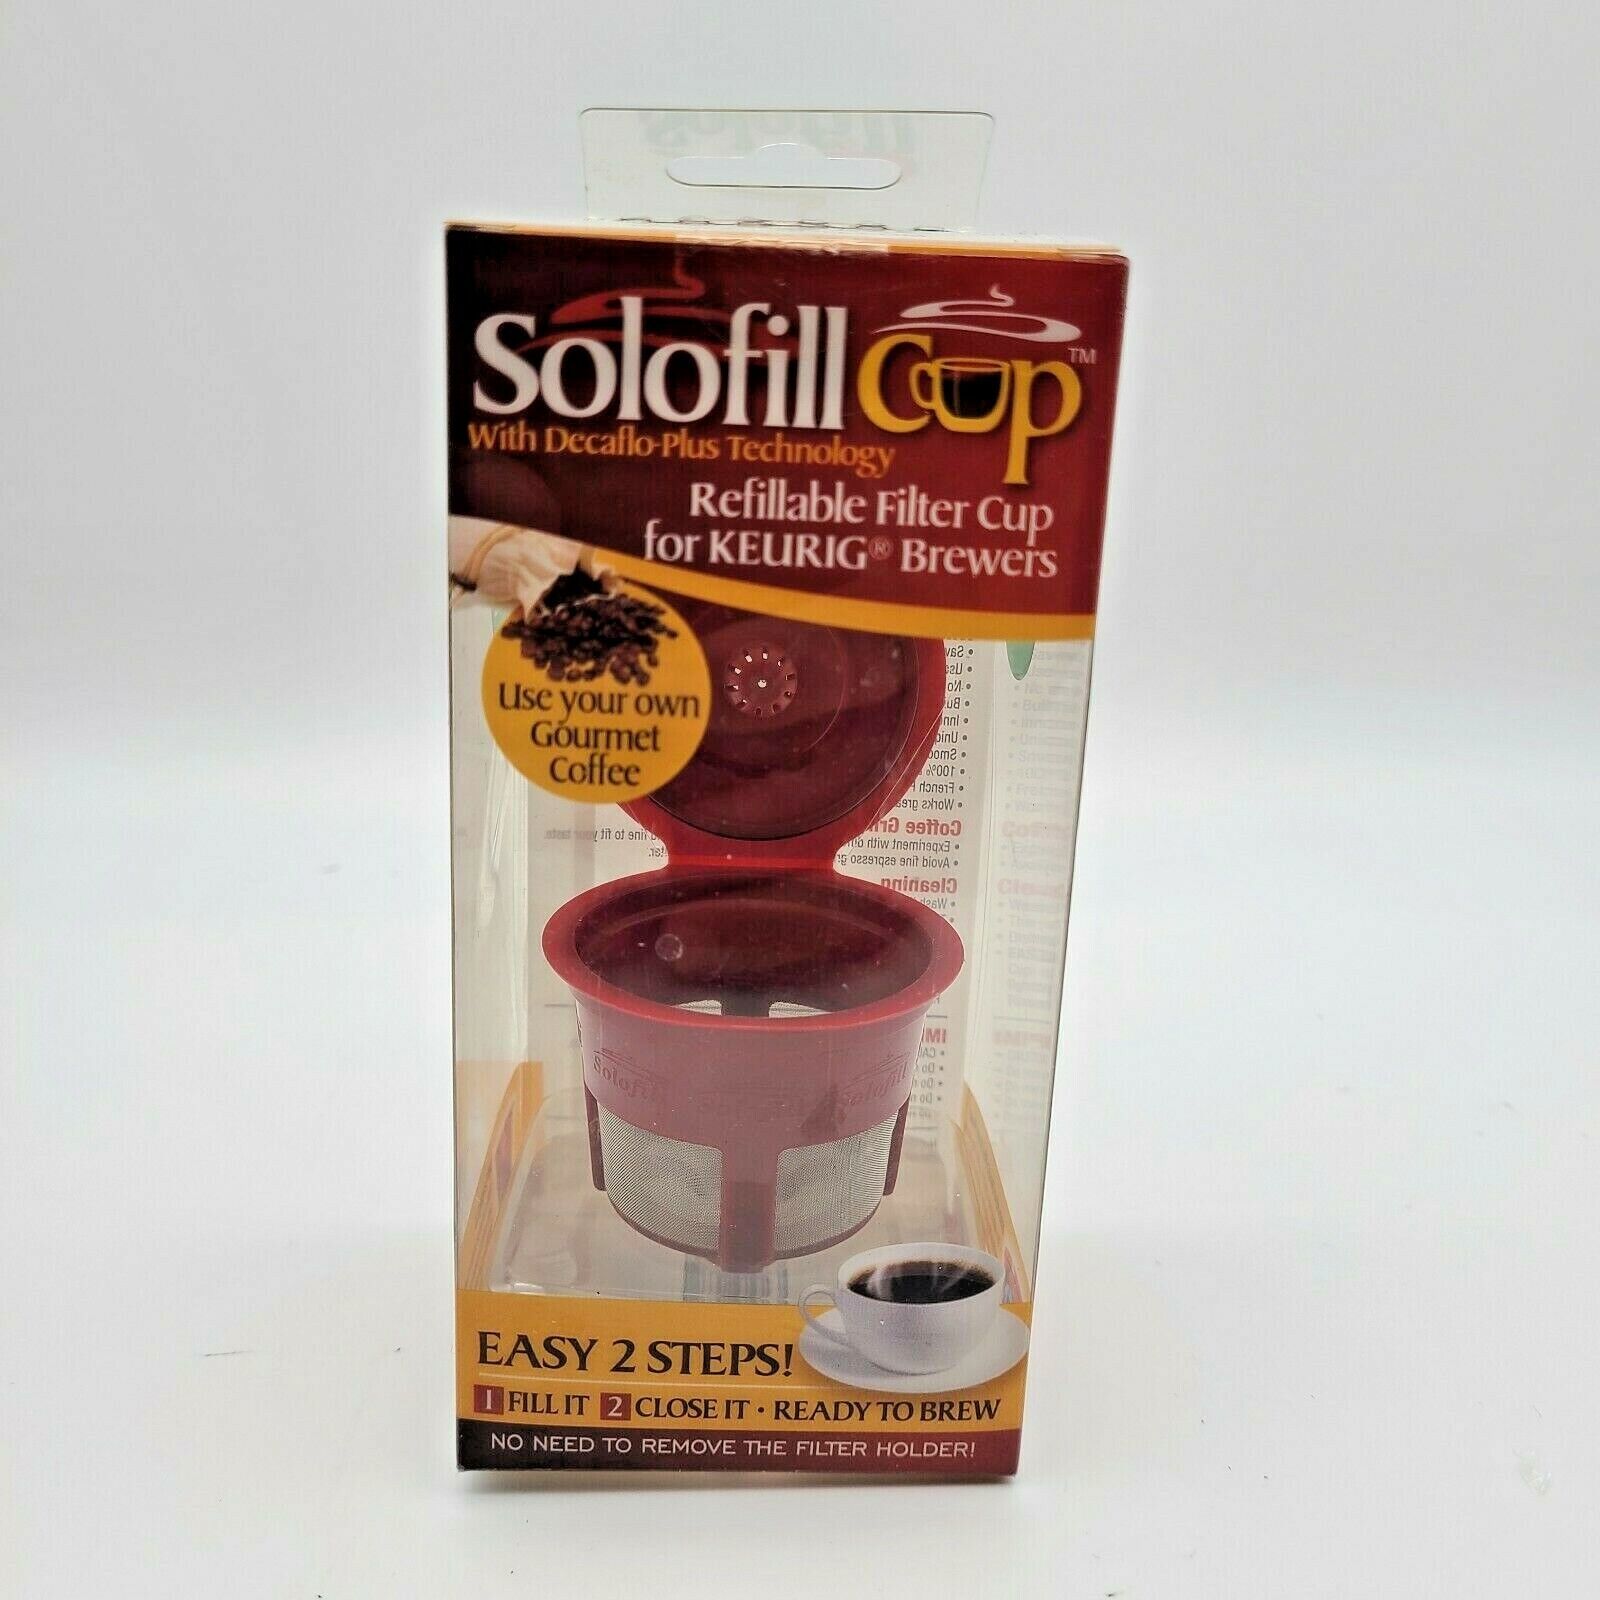 SOLOFILL K Cup Refillable Coffee Filter For Keurig Brewing System BPA Free NEW - $14.80